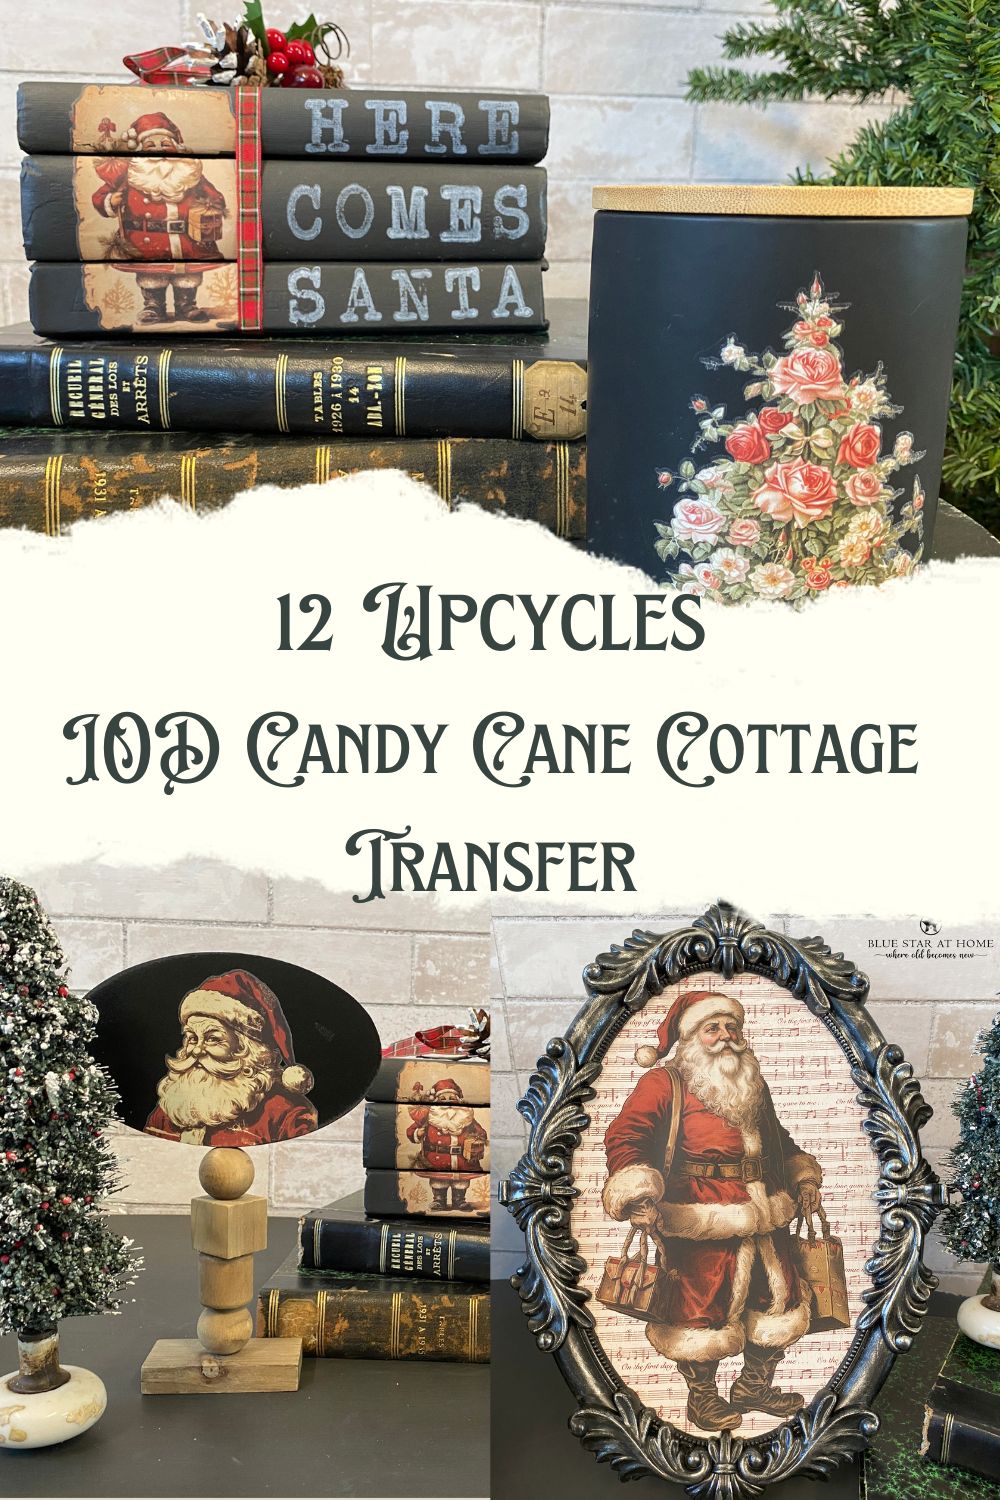 12 upcycles using the IOD Candy Cane Cottage transfer